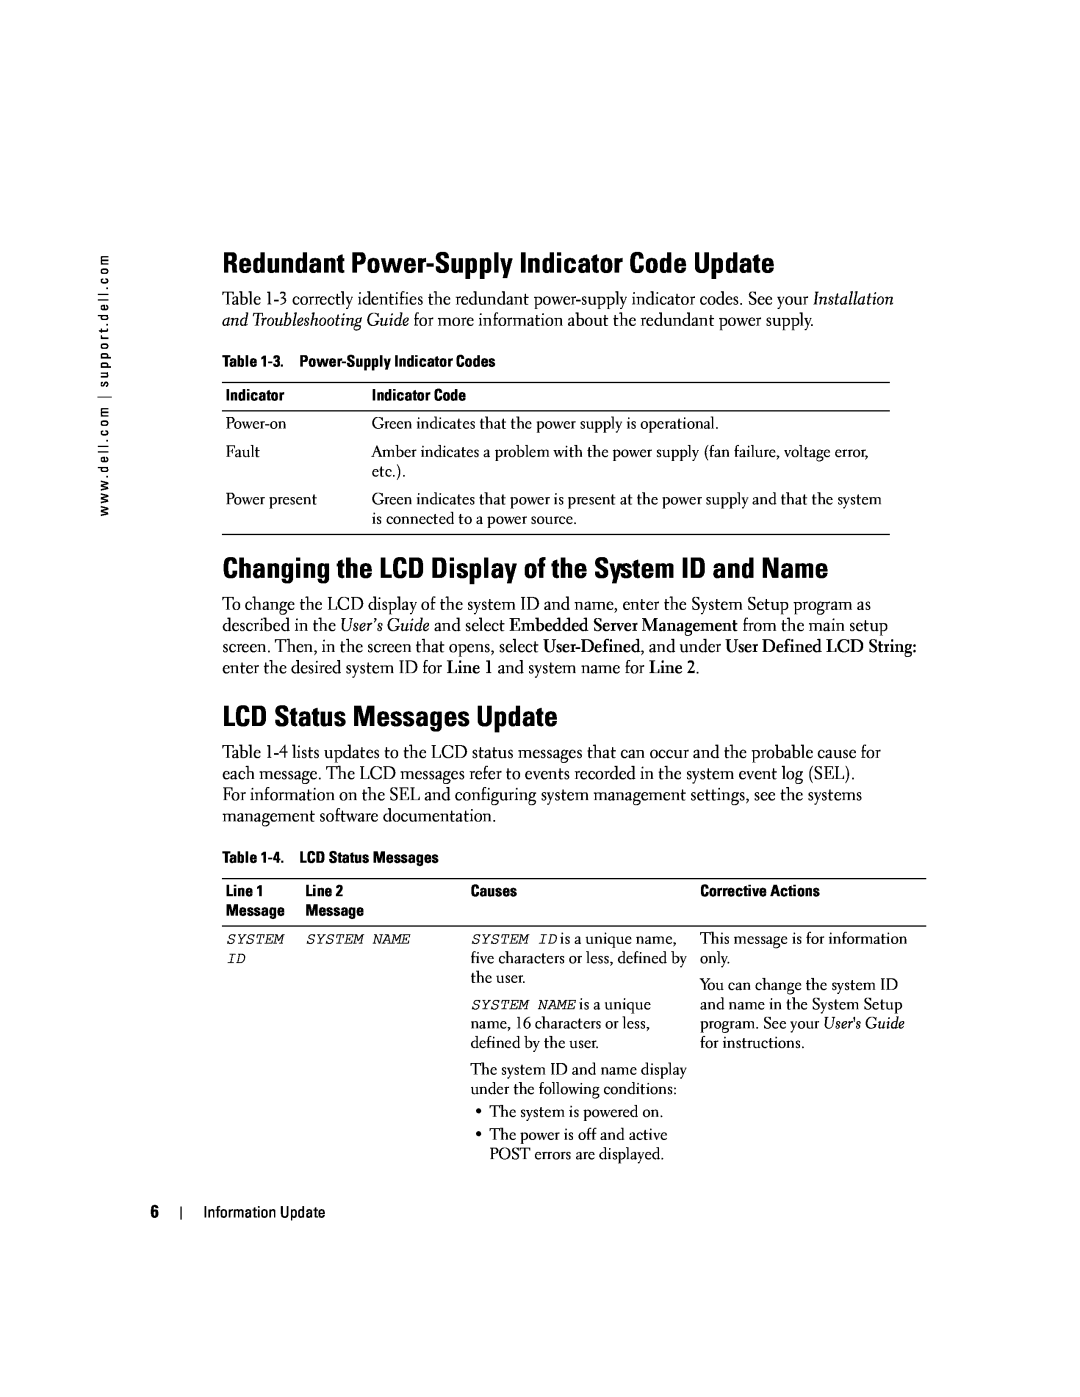 Dell 2850 manual Redundant Power-Supply Indicator Code Update, Changing the LCD Display of the System ID and Name 